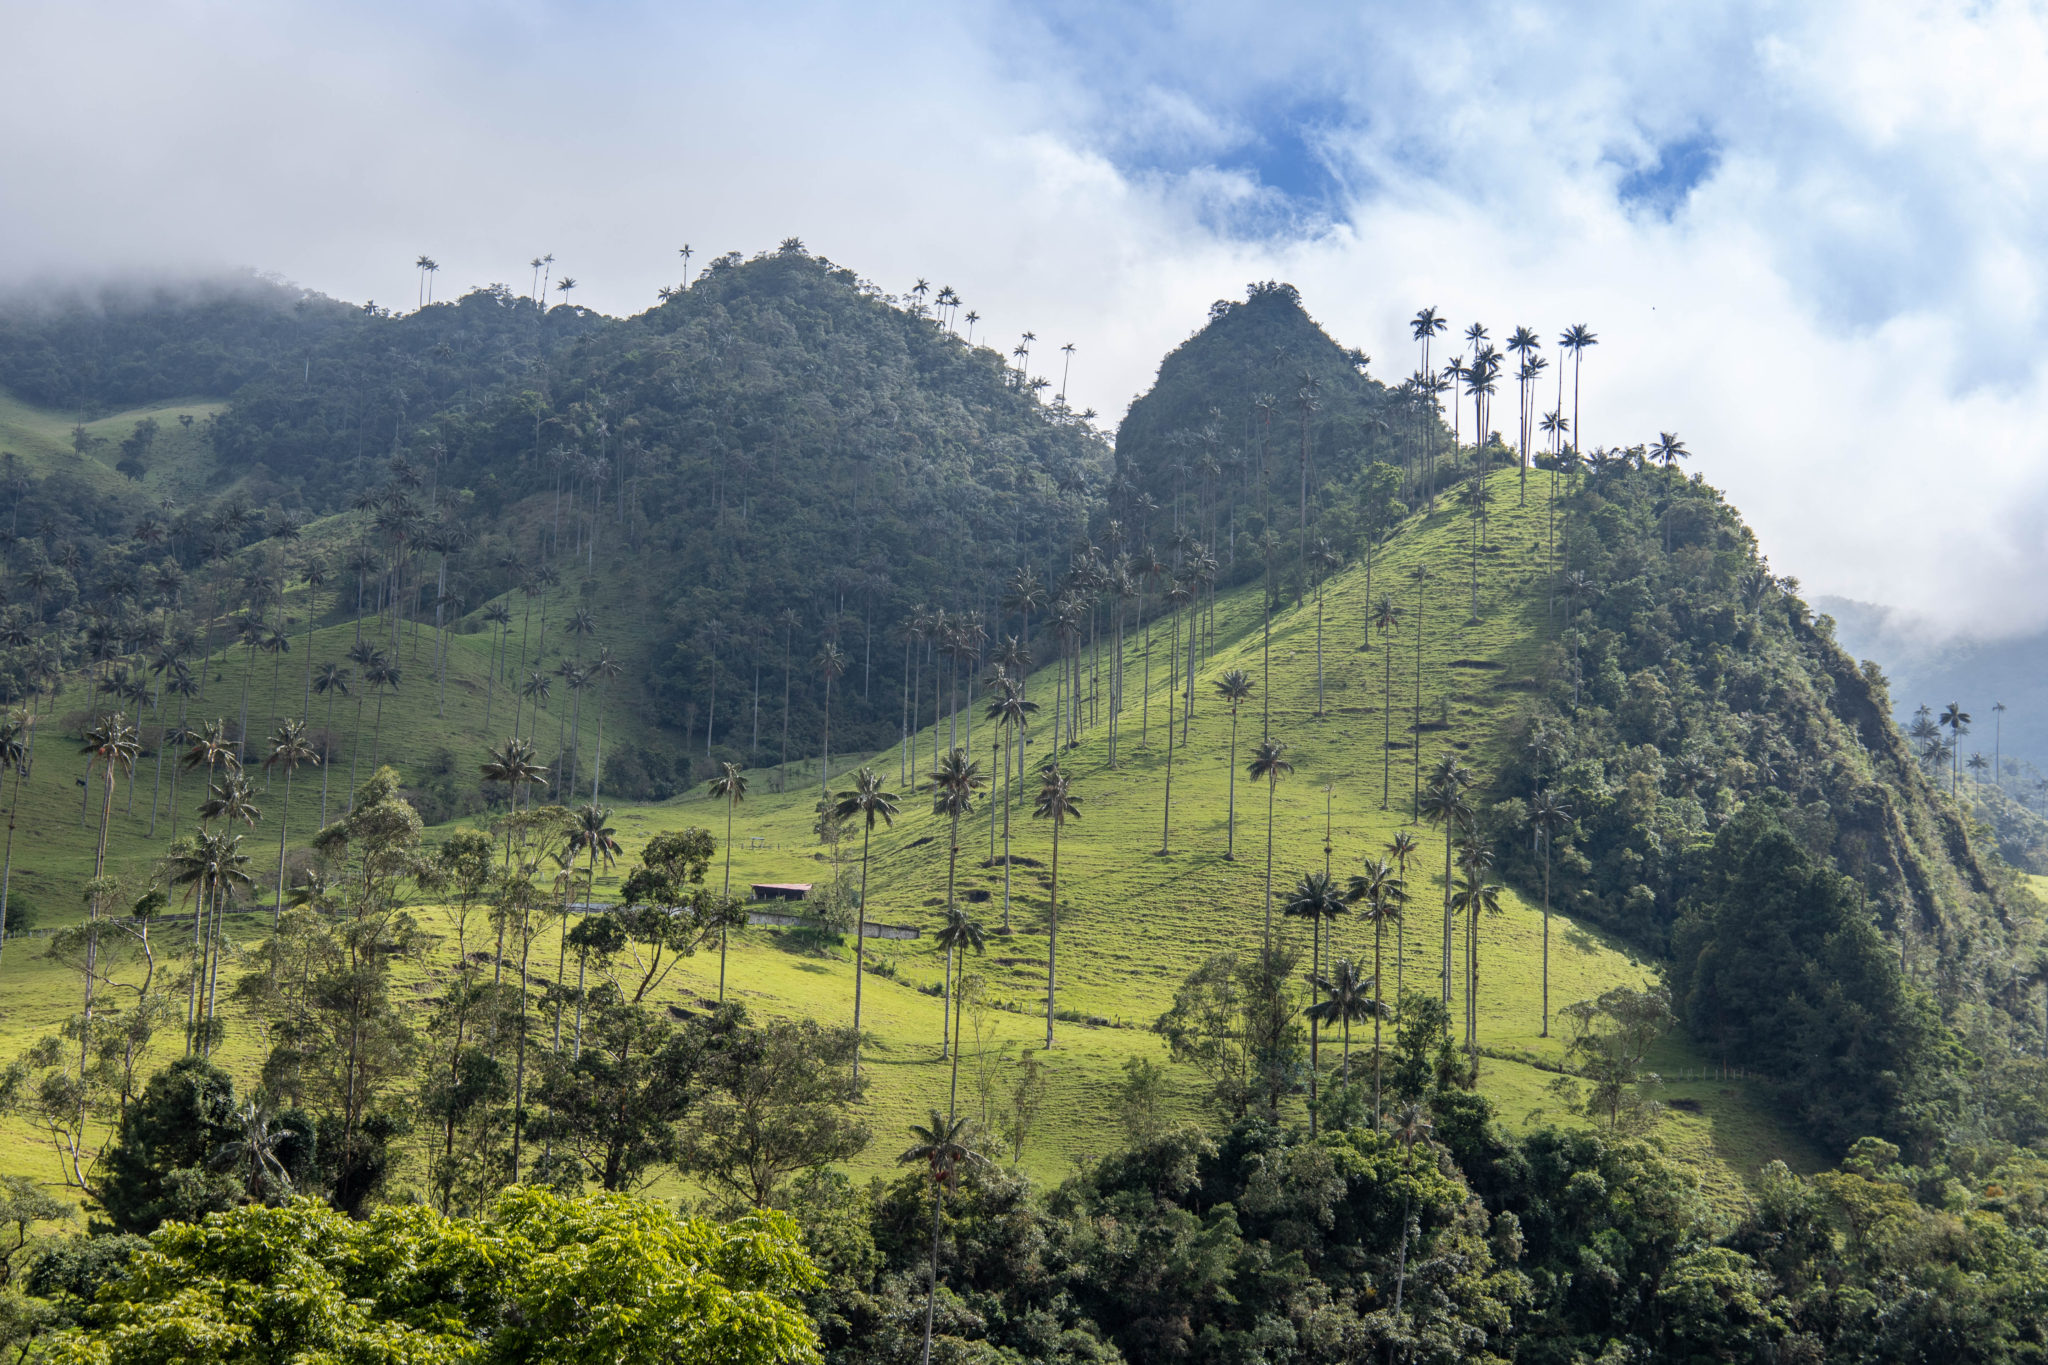 Tall palm trees on the Andes mountains of the Cocora Valley near Salento, Colombia.